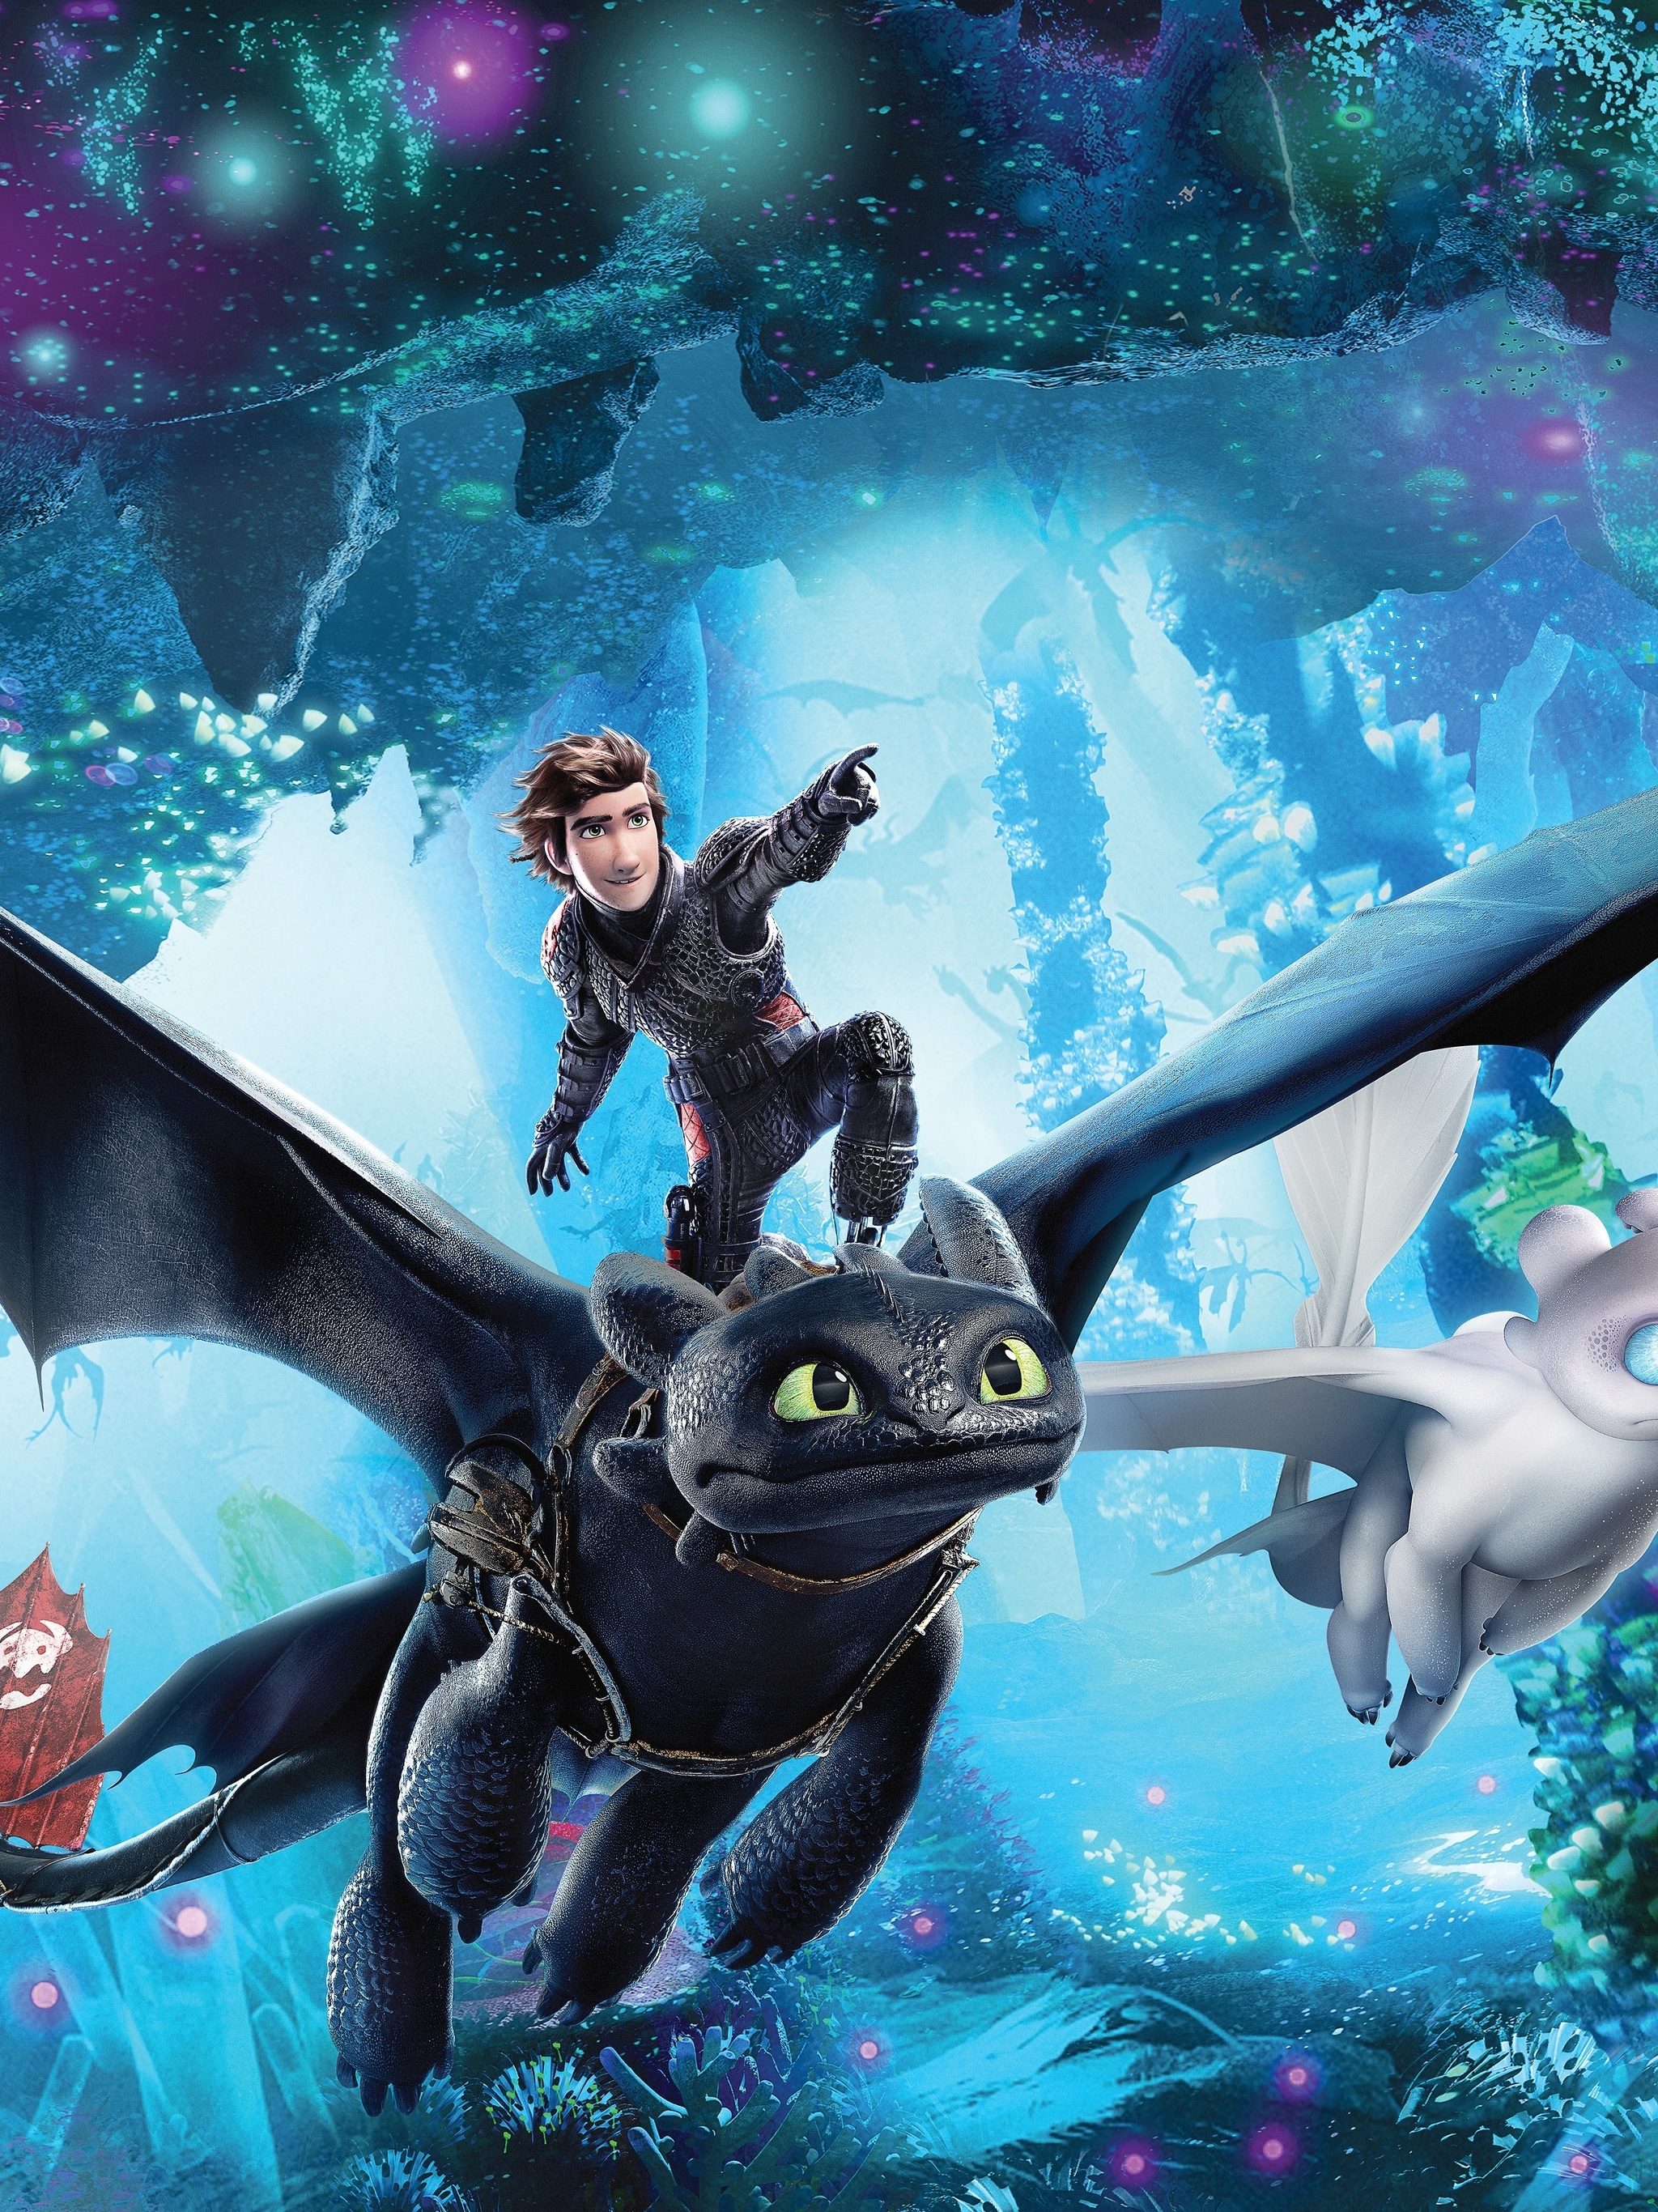 Day fury, wings, flight, toothless, Hiccup, How to train your dragon 3, Hid...